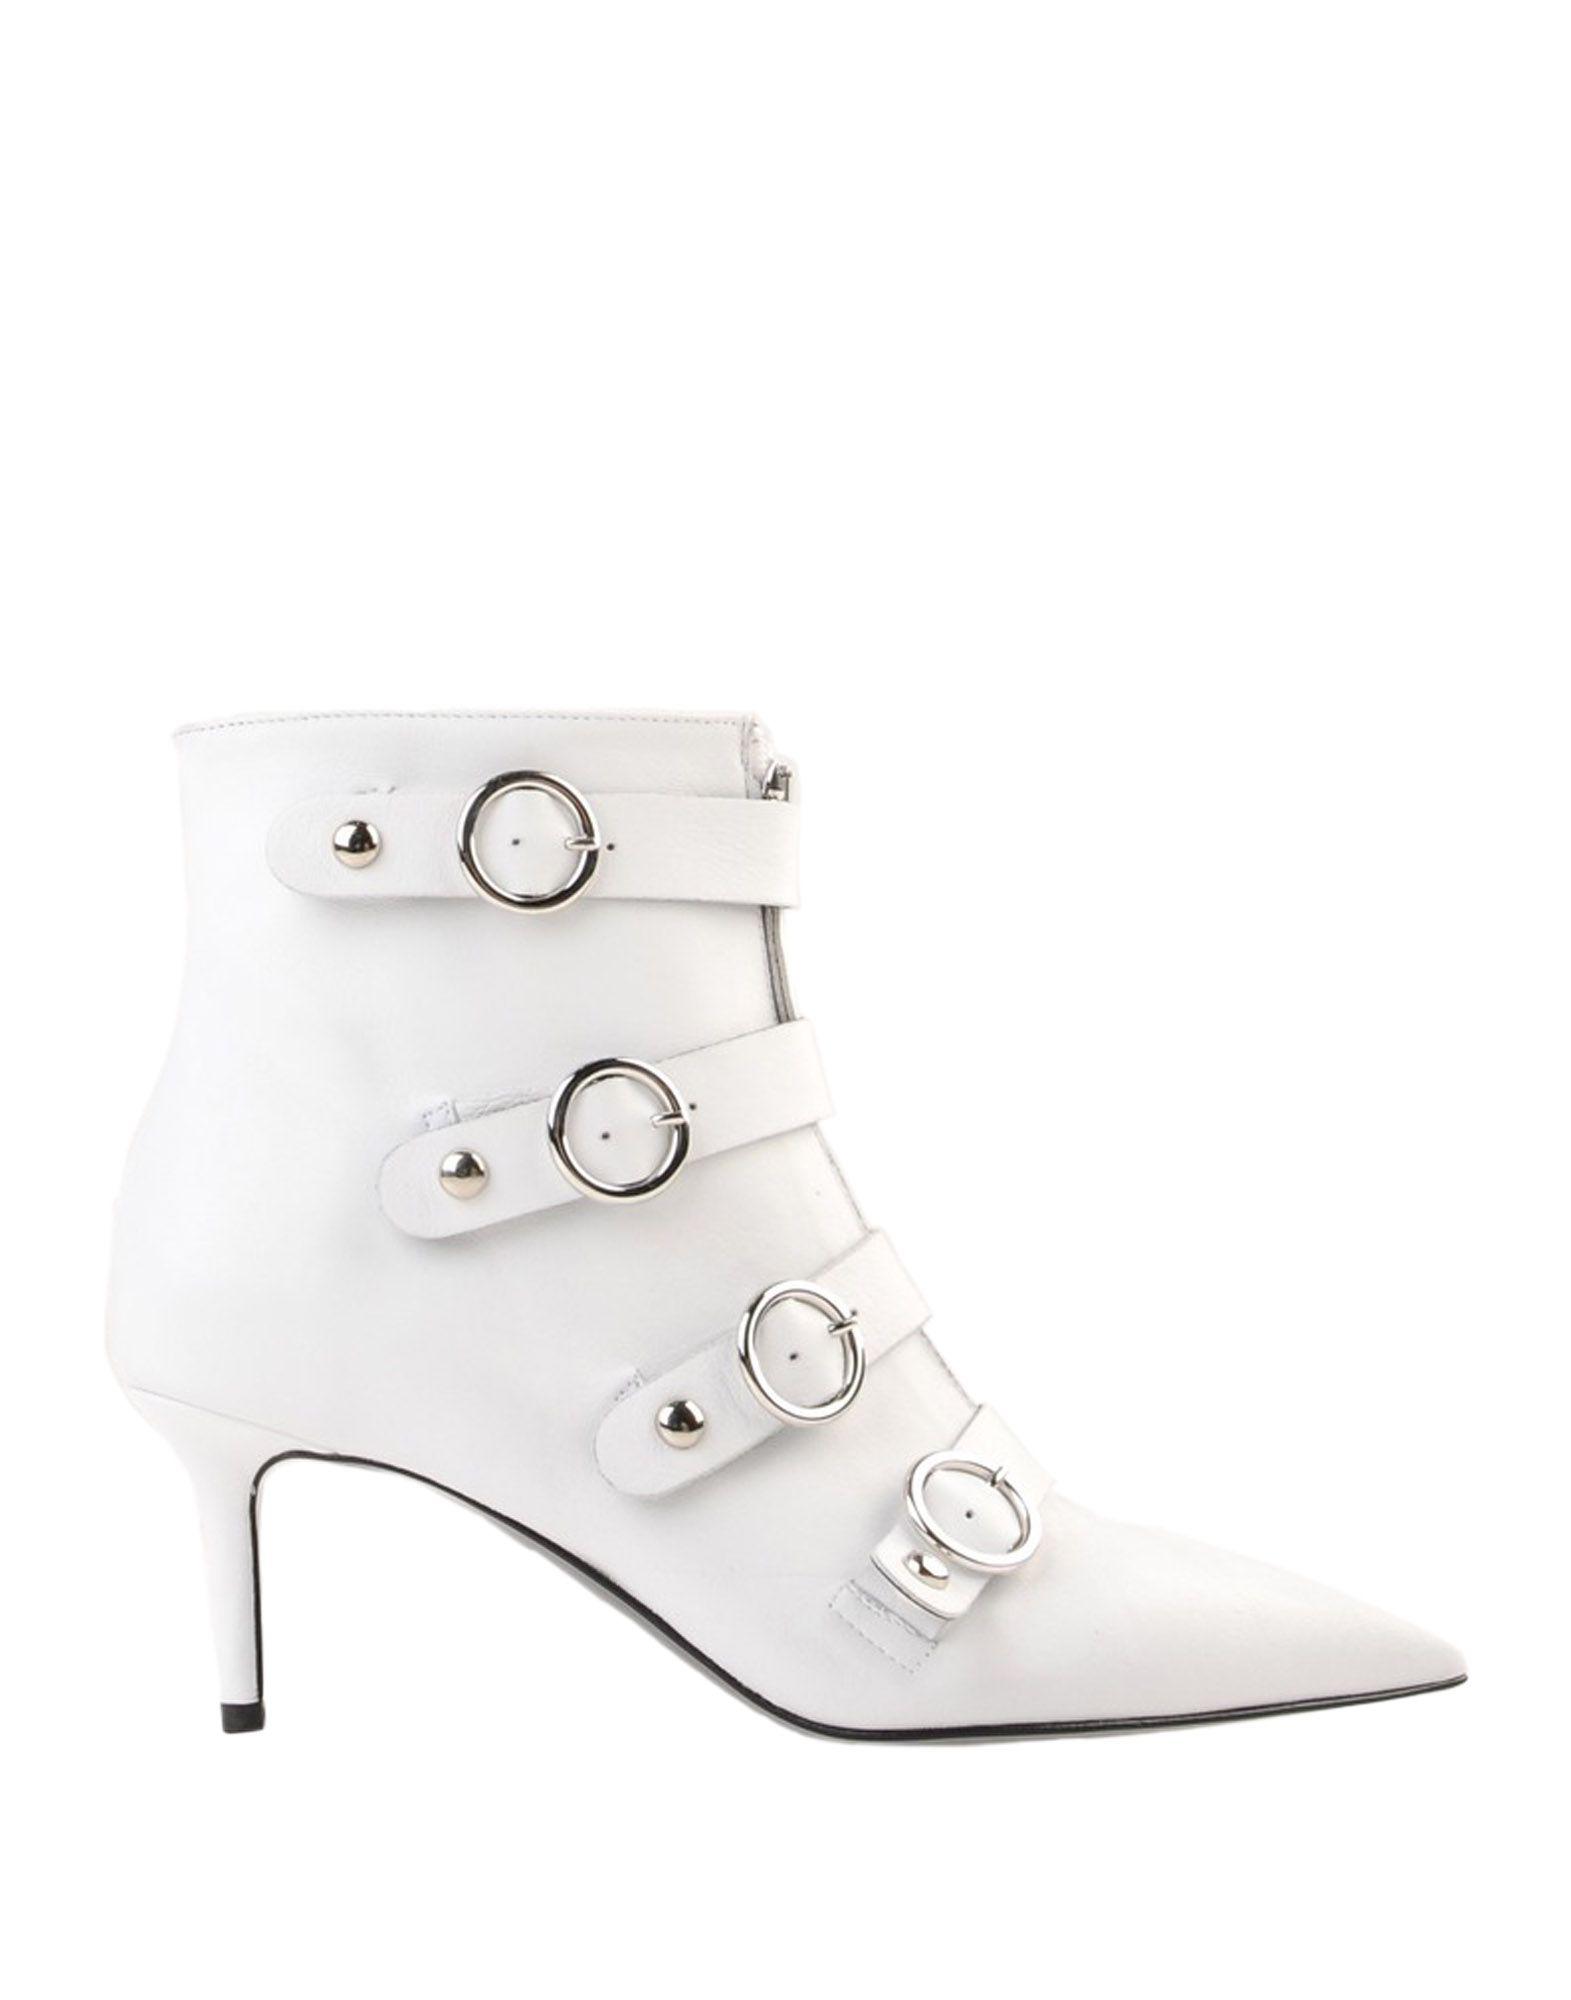 Bianca Di Leather Ankle Boots in White - Lyst